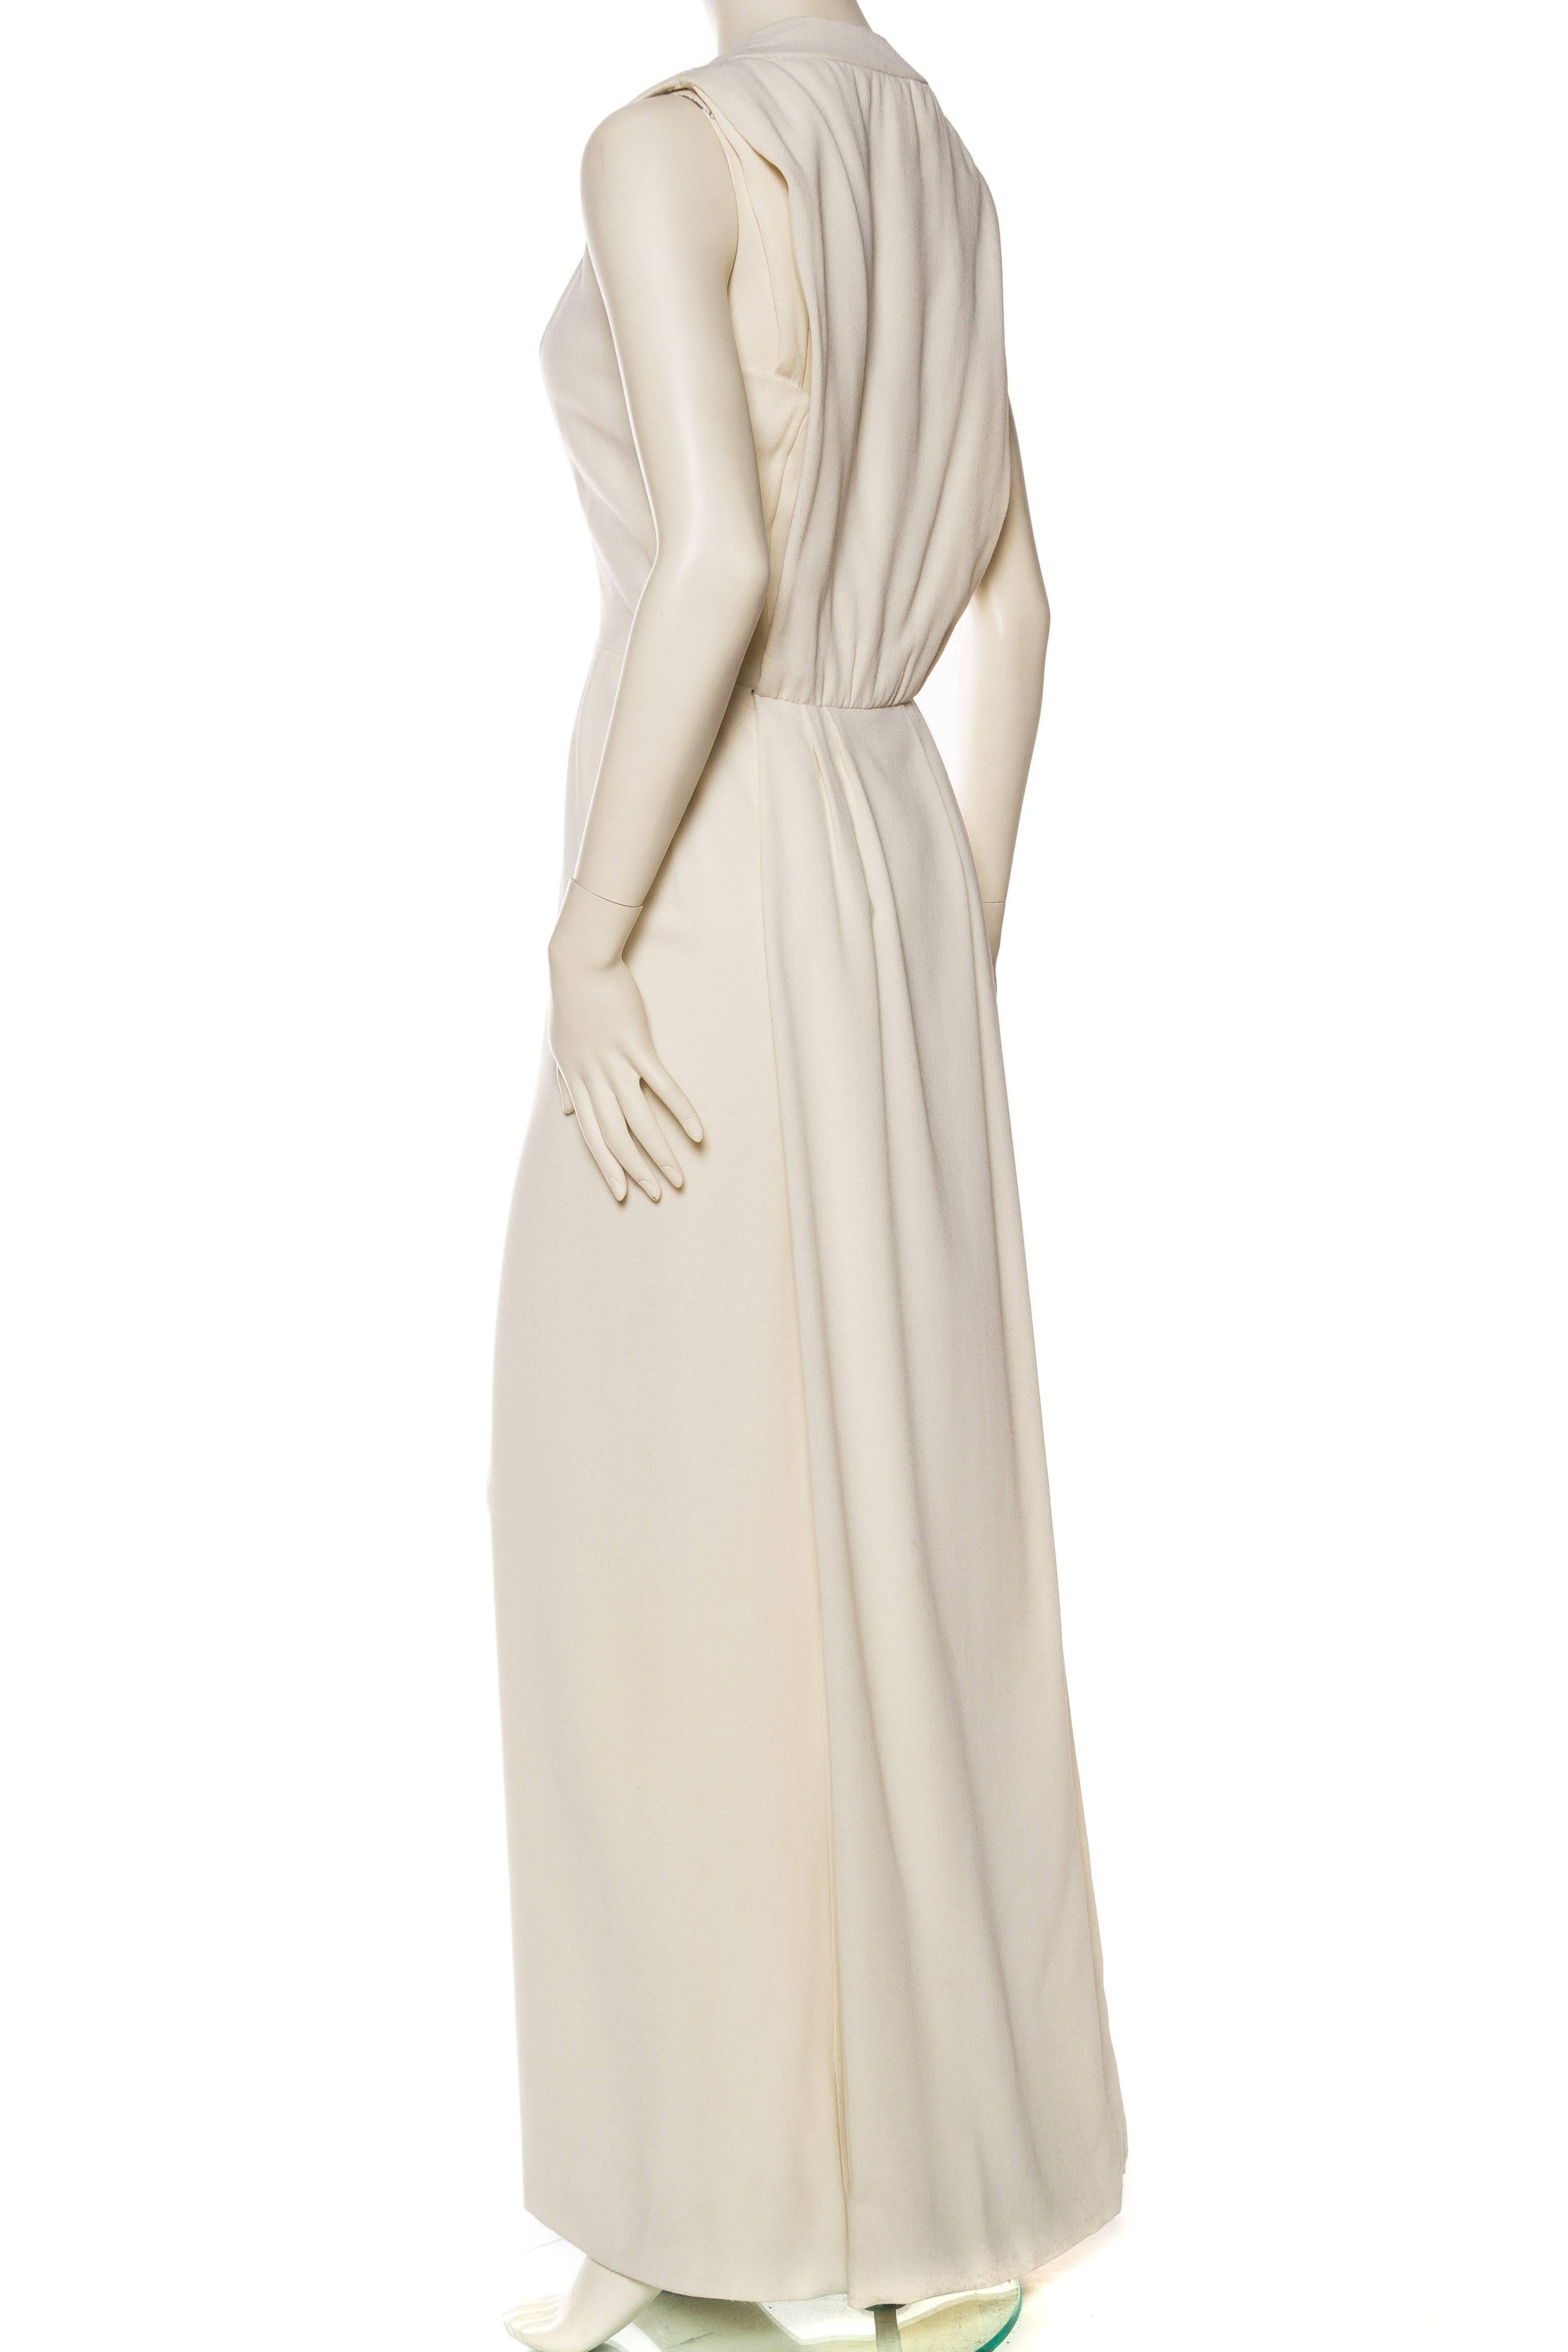 1960S PIERRE BALMAIN Off White Rayon & Silk Crepe Modernist Gown With Draped Ba In Excellent Condition For Sale In New York, NY